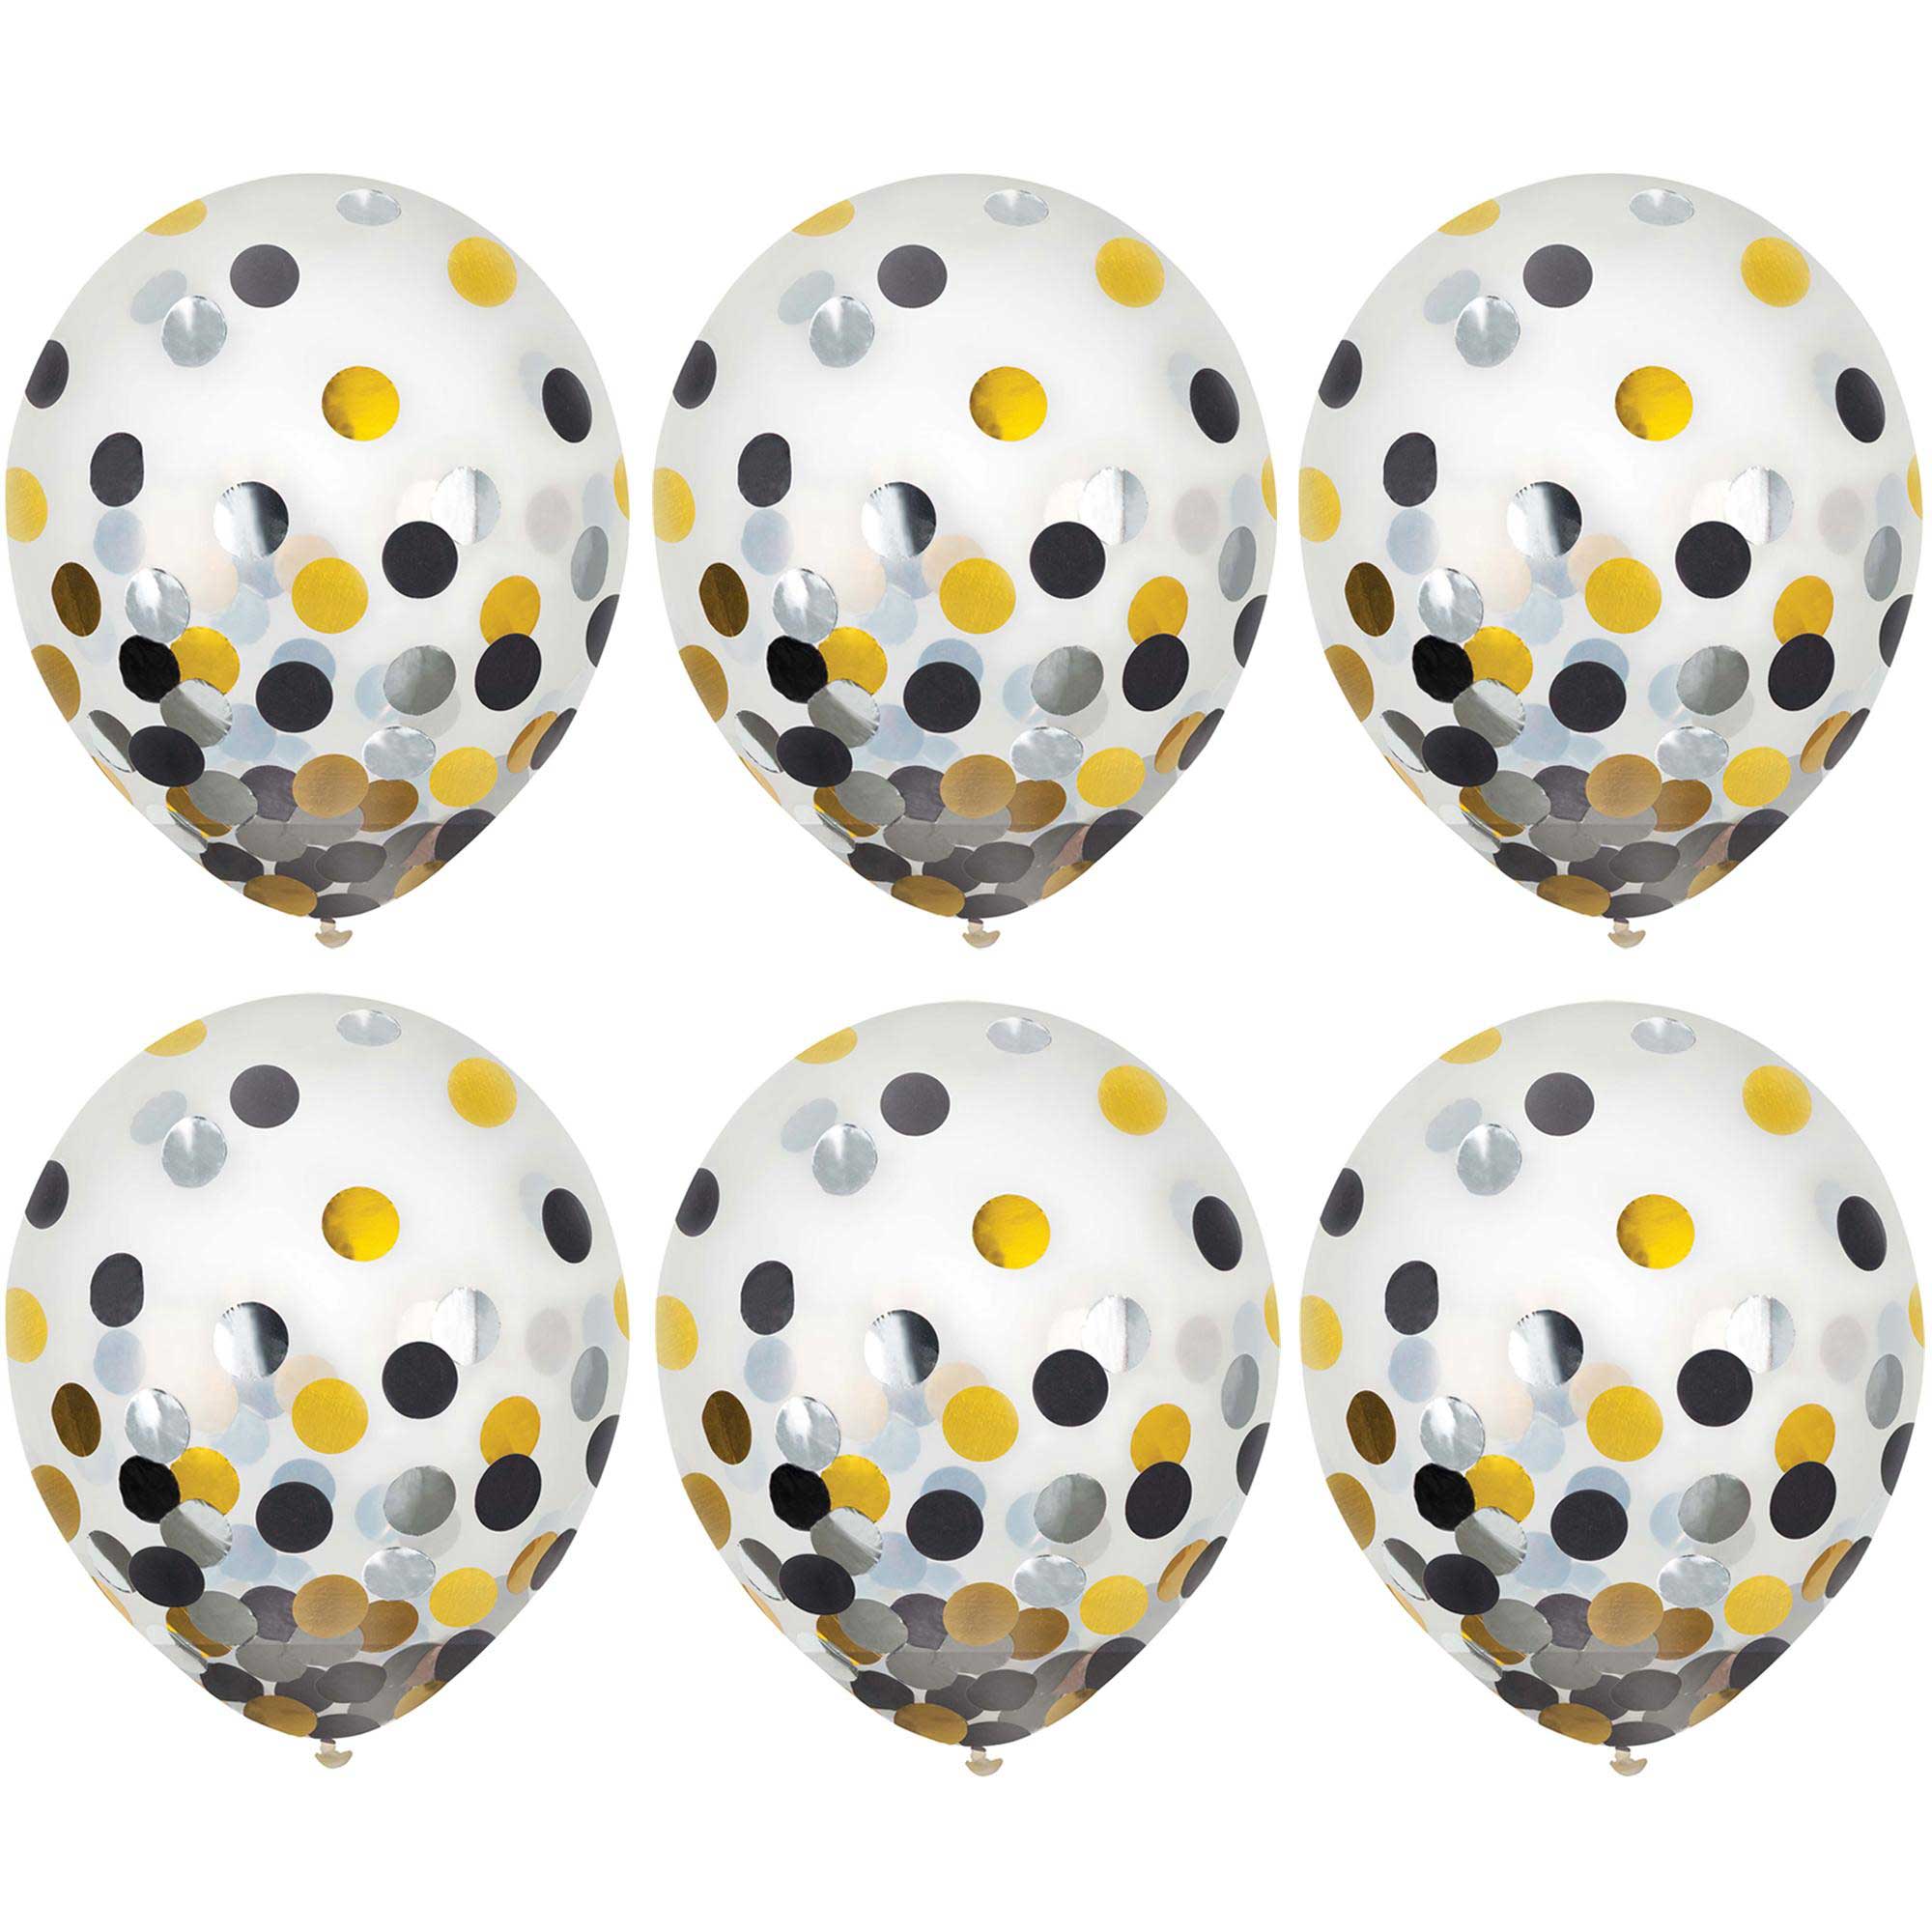 Black, Silver, Gold Latex Balloons With Confetti 12in, 6pcs Balloons & Streamers - Party Centre